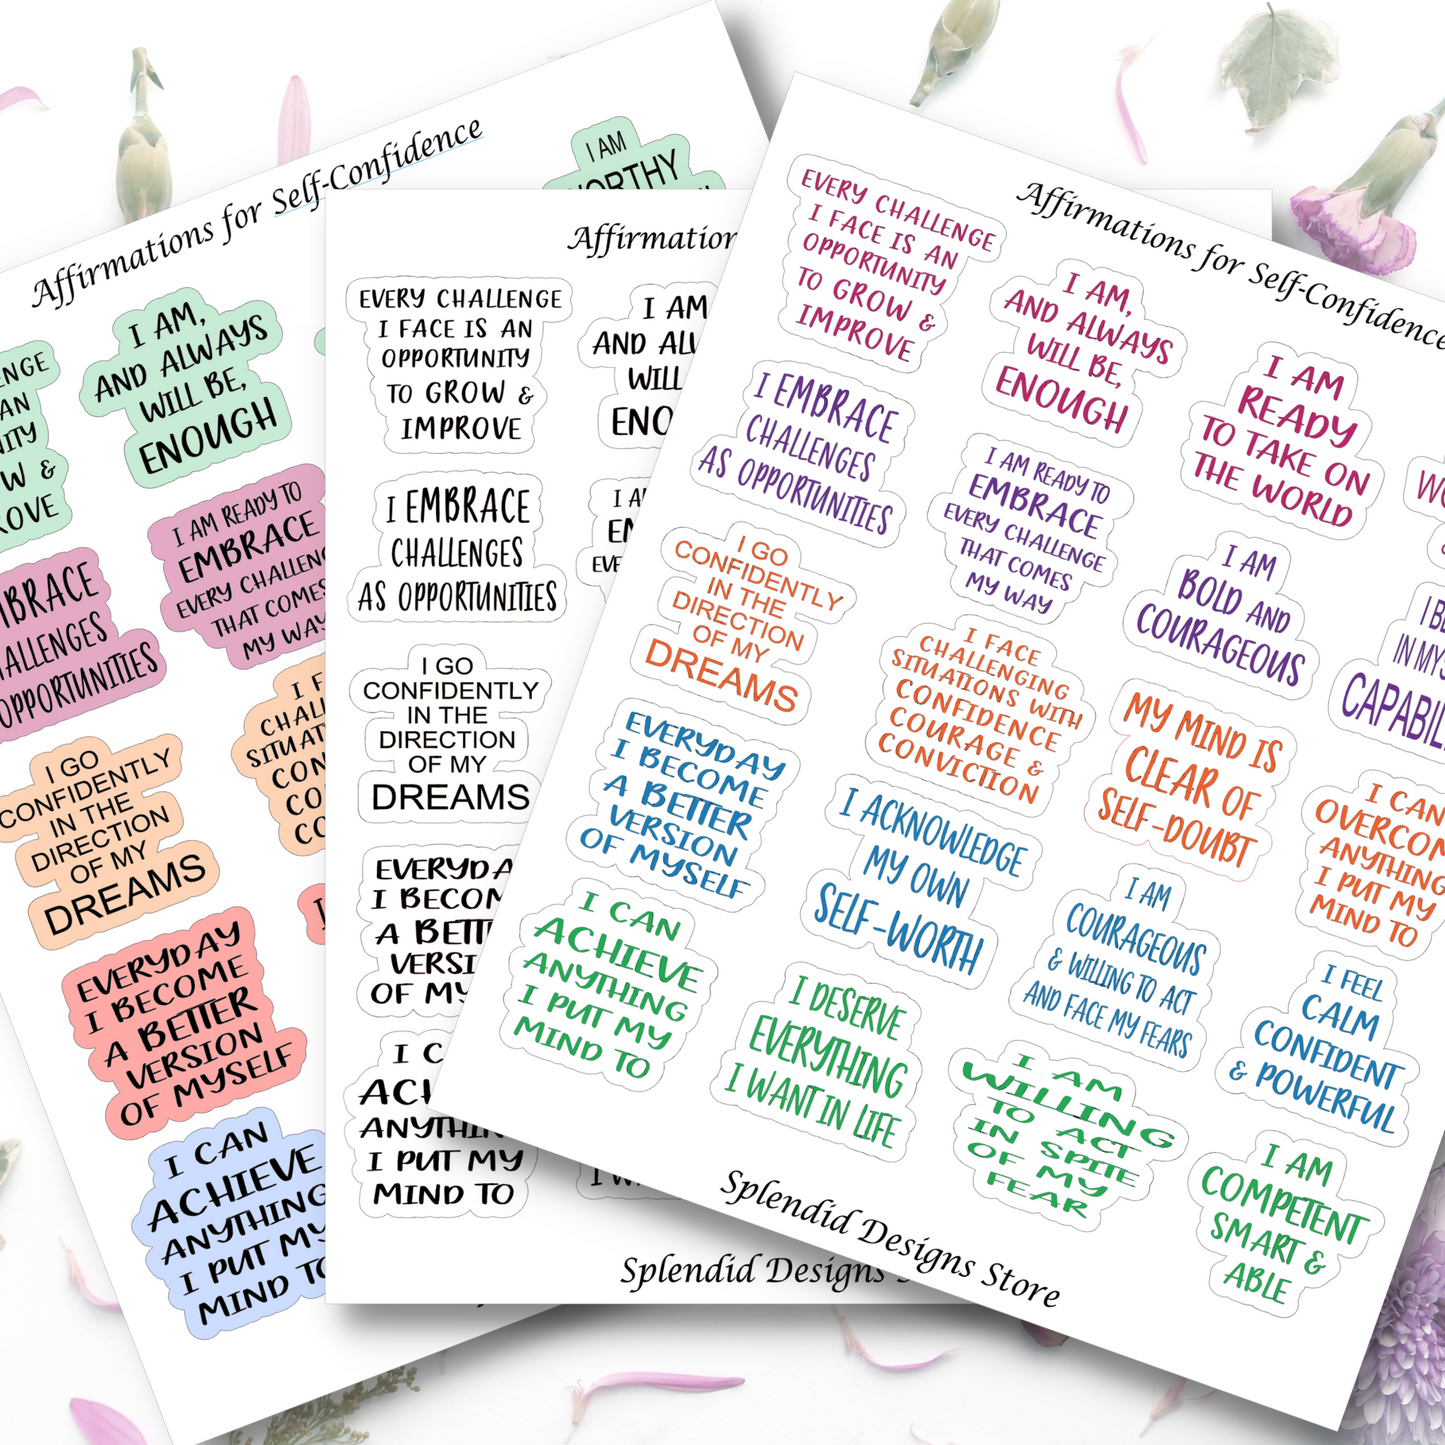 affirmations for self-confidence sticker sheet